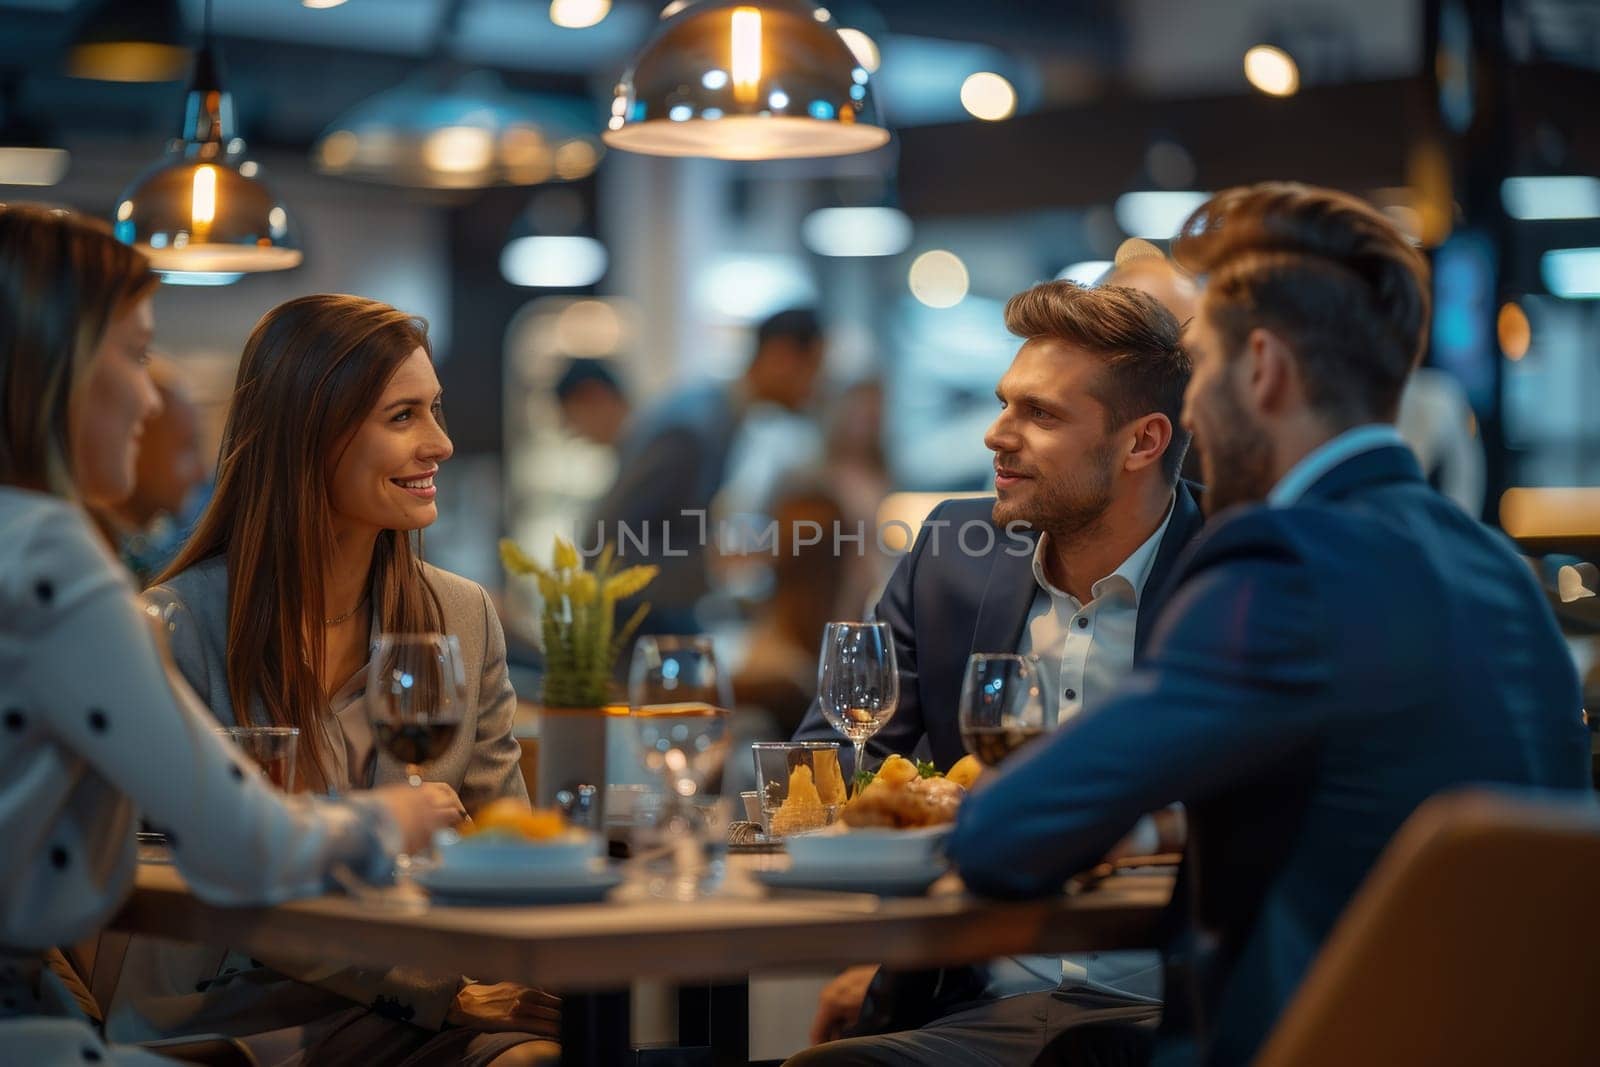 A group of people are sitting at a table with wine glasses and plates of food. A woman is smiling at the camera